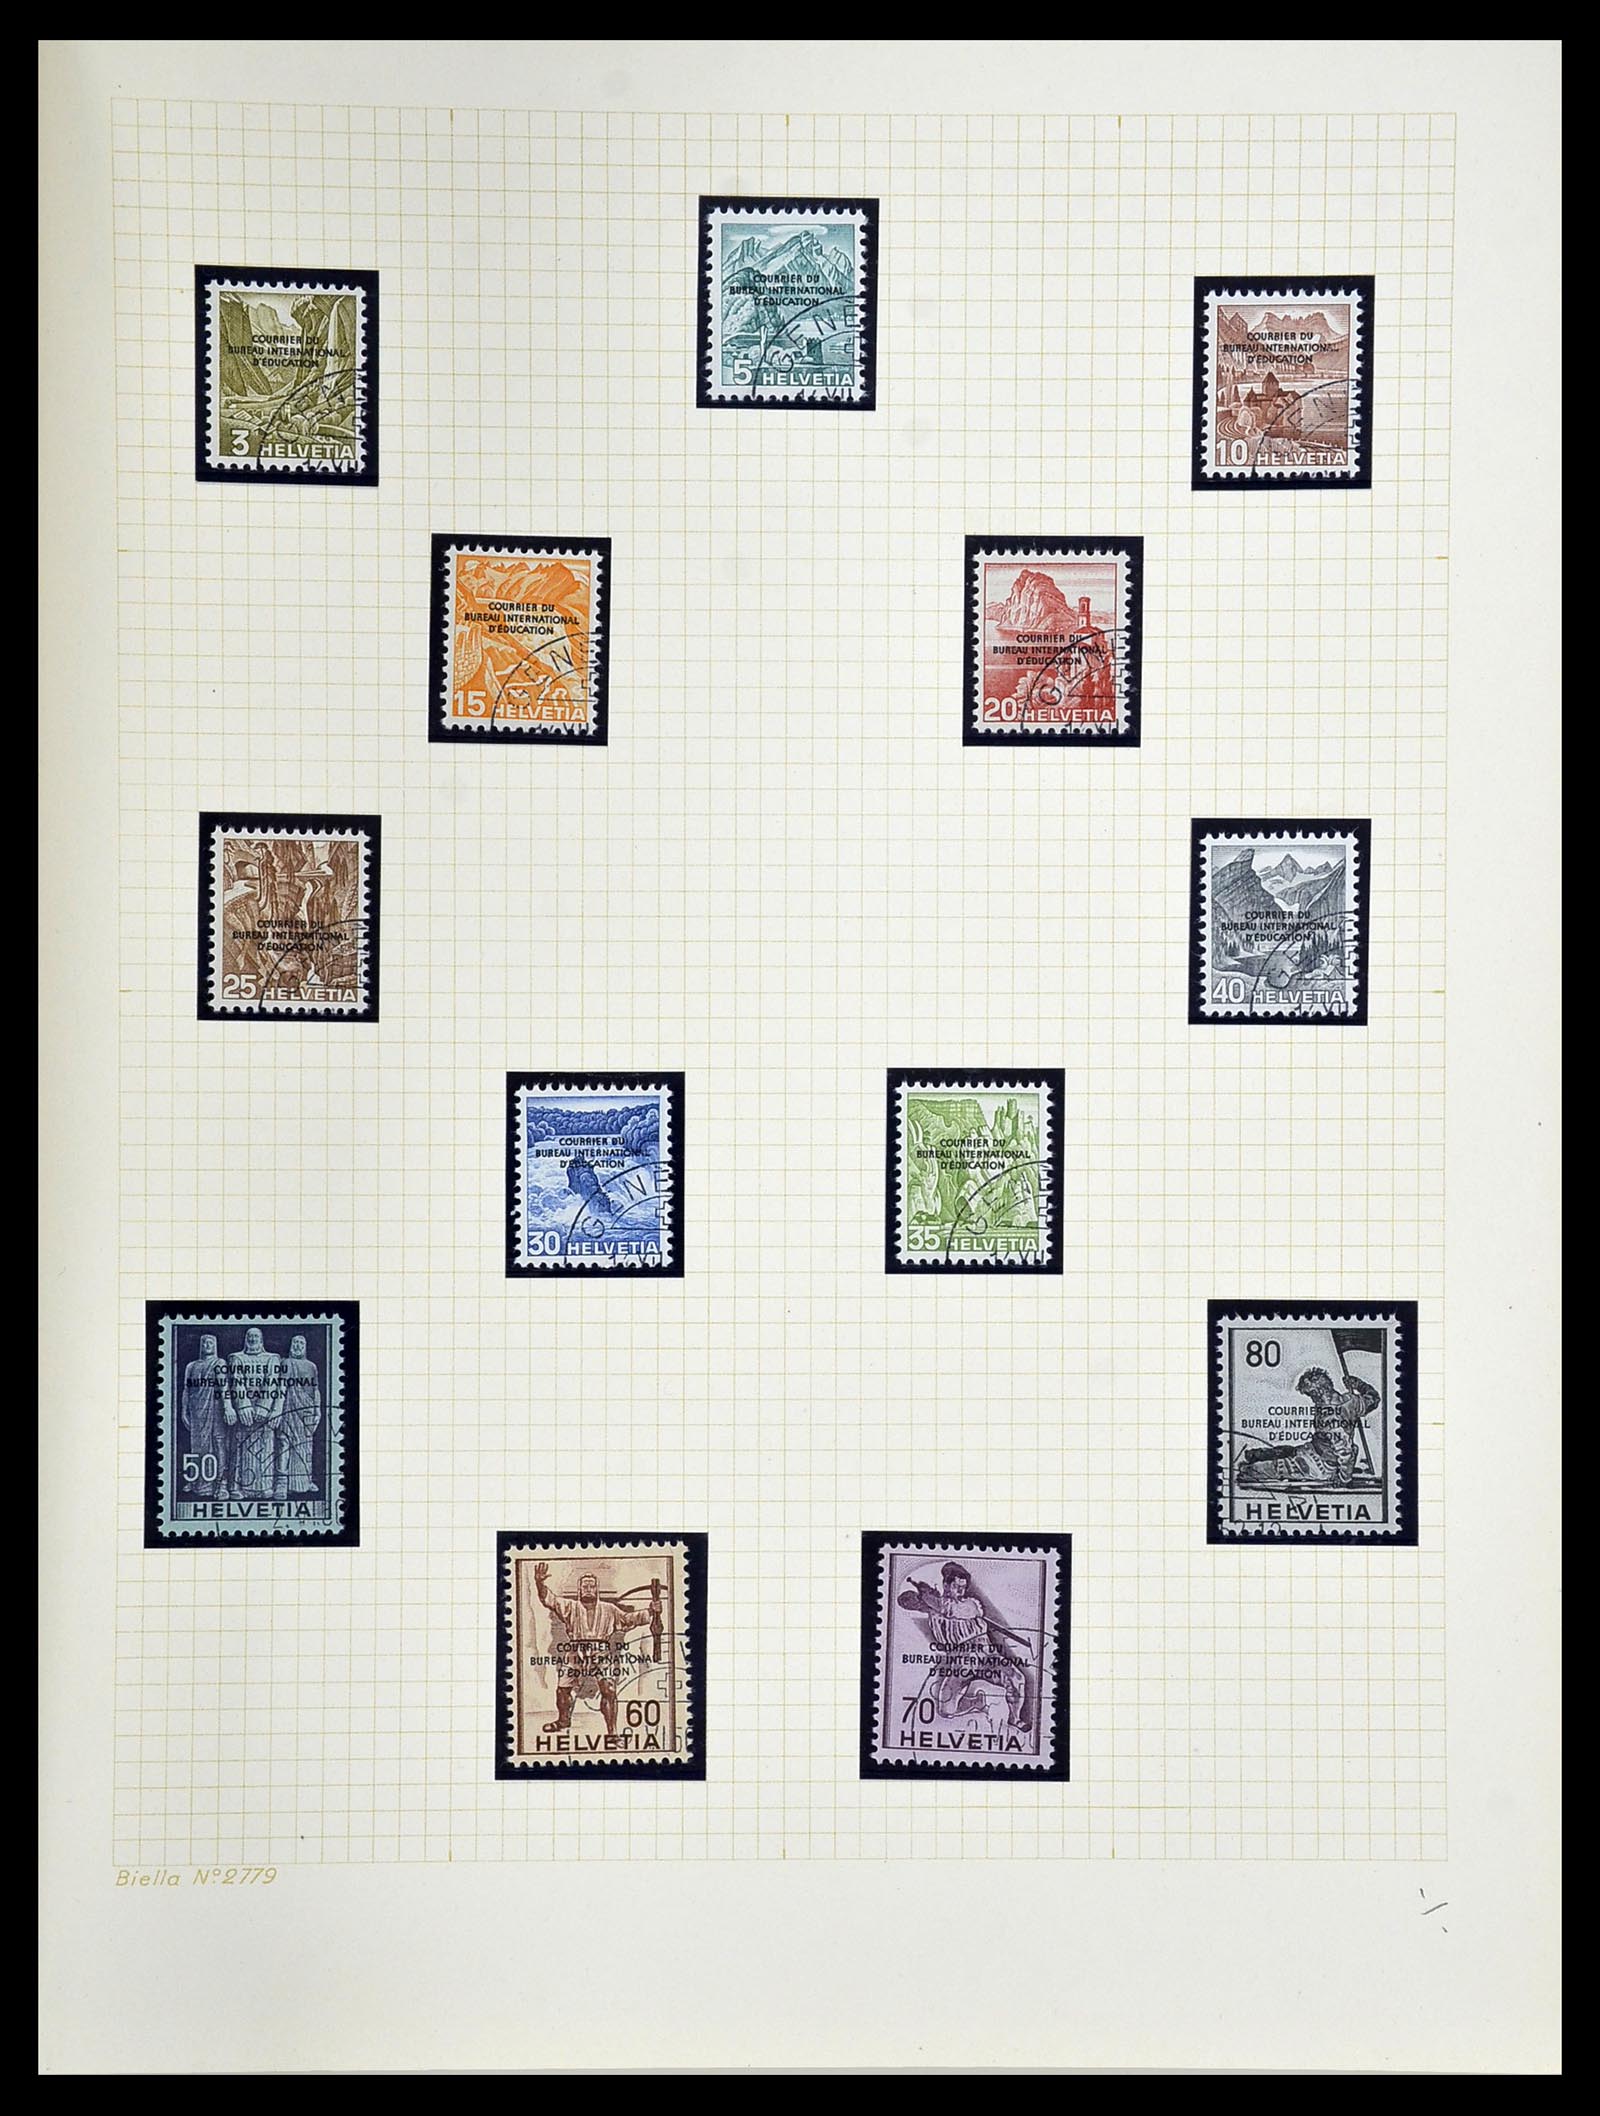 34135 029 - Stamp collection 34135 Switzerland back of the book 1910-1950.